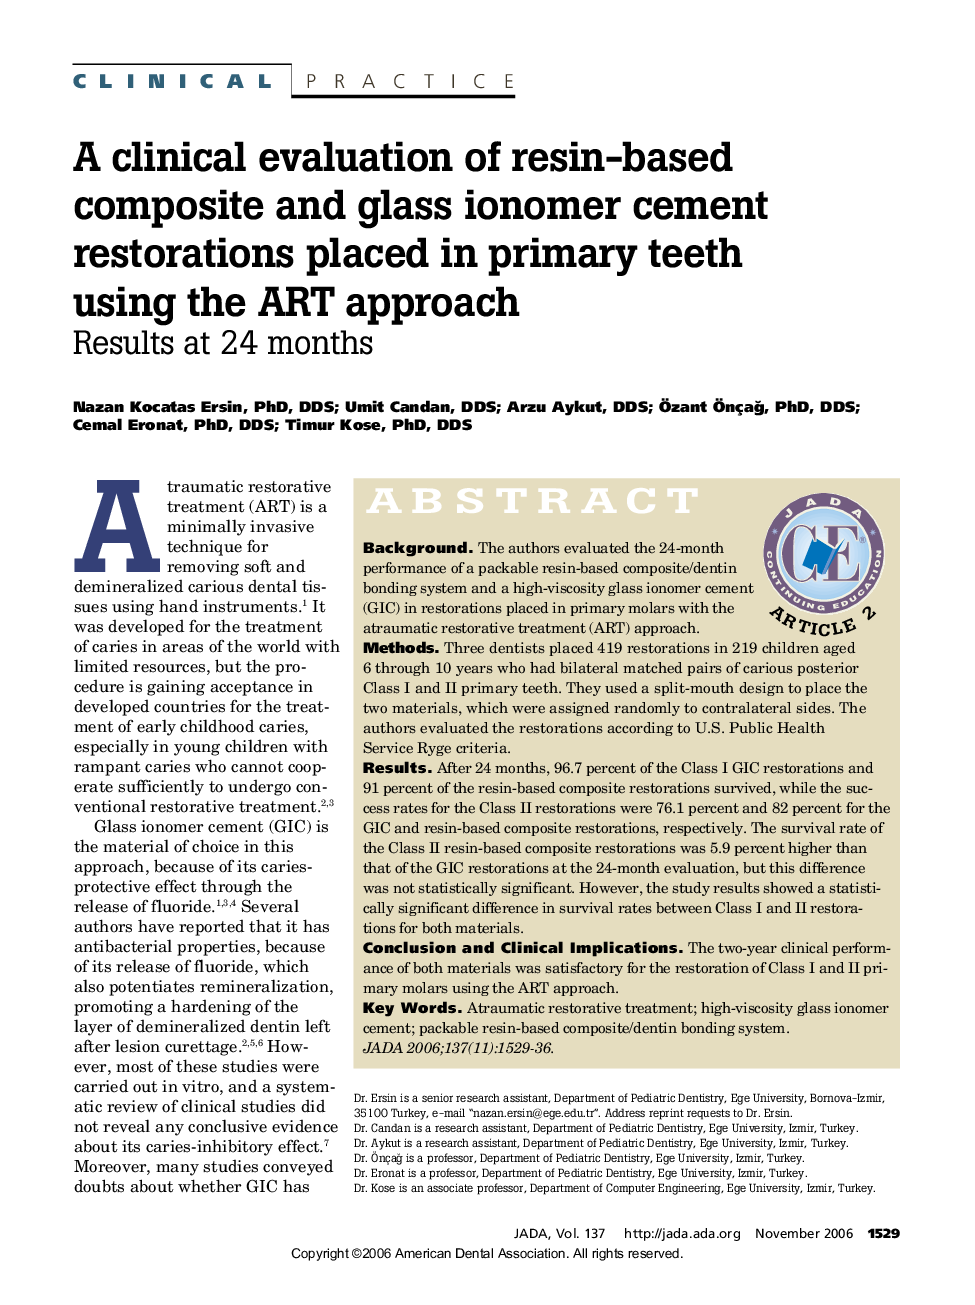 A clinical evaluation of resin-based composite and glass ionomer cement restorations placed in primary teeth using the ART approach : Results at 24 months